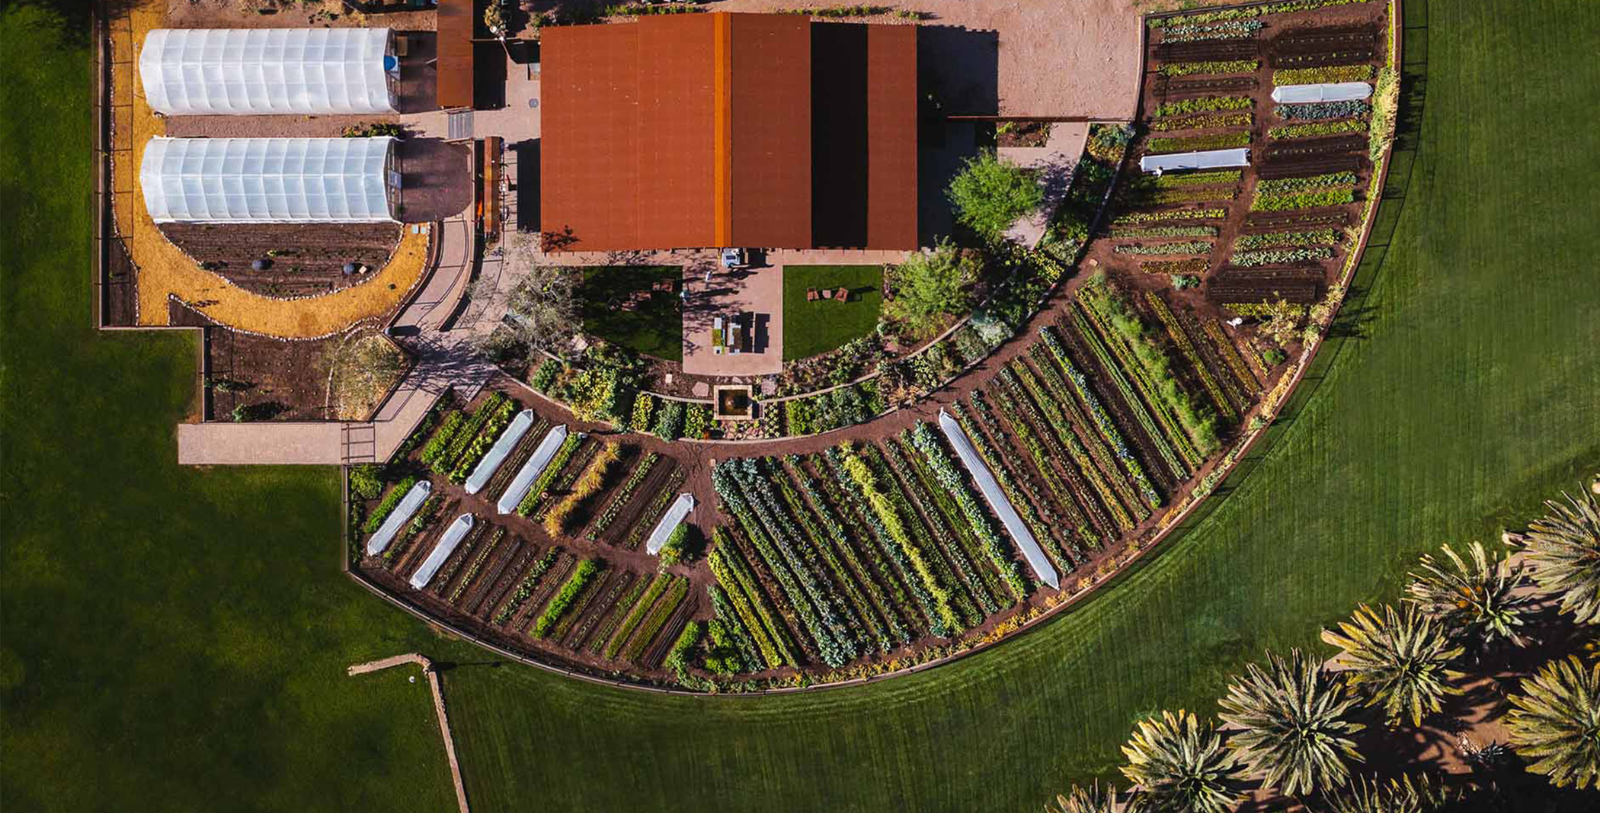 Explore the resort’s artisanal on-site farm, which gives rise to more than 150 crops each season.